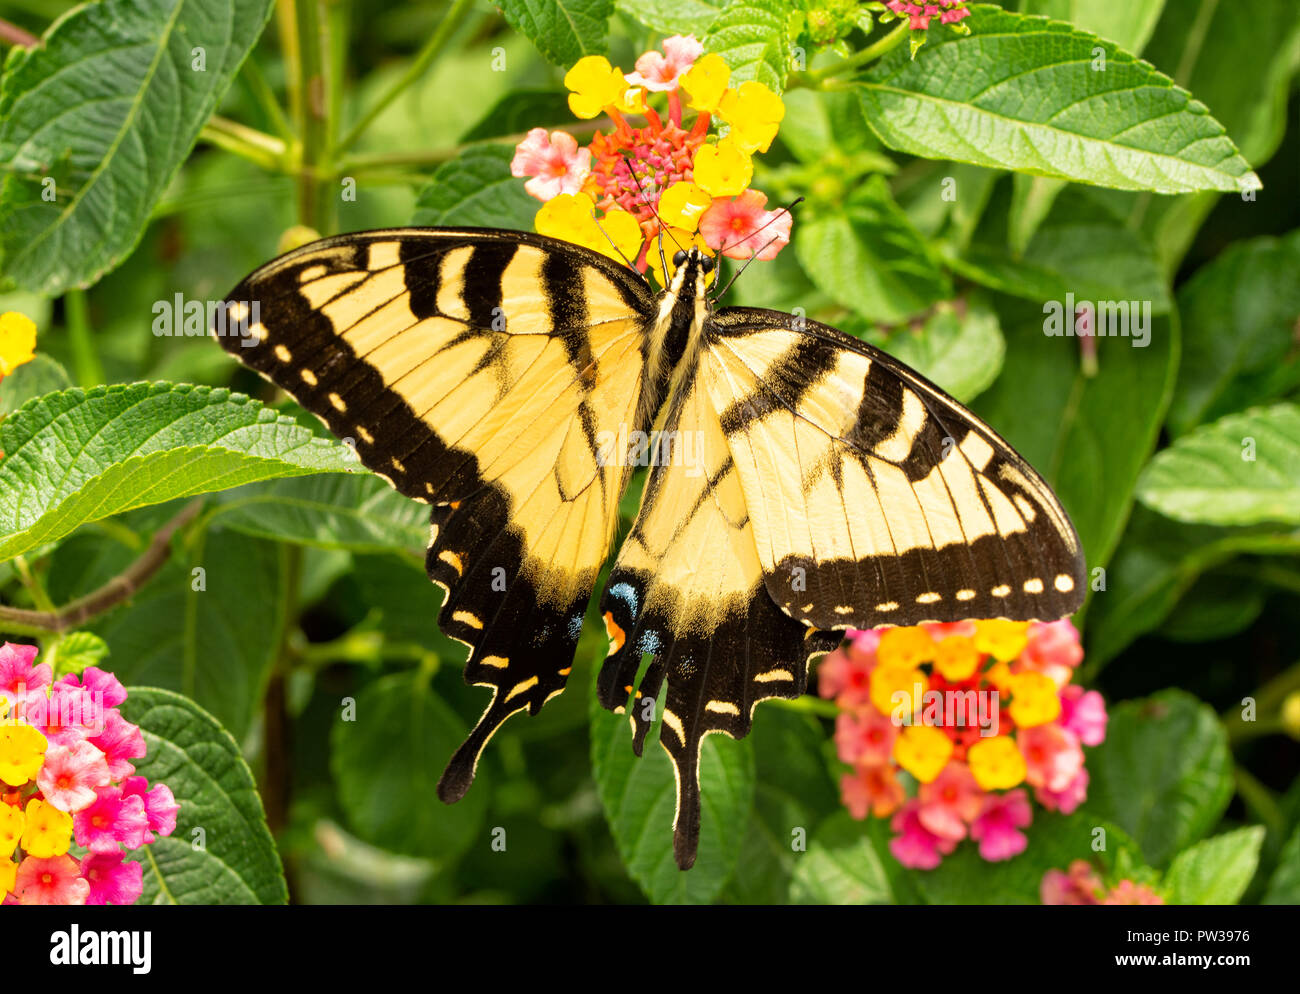 Beautiful yellow and black Eastern Tiger Swallowtail butterfly pollinating a colorful Lantana flower Stock Photo